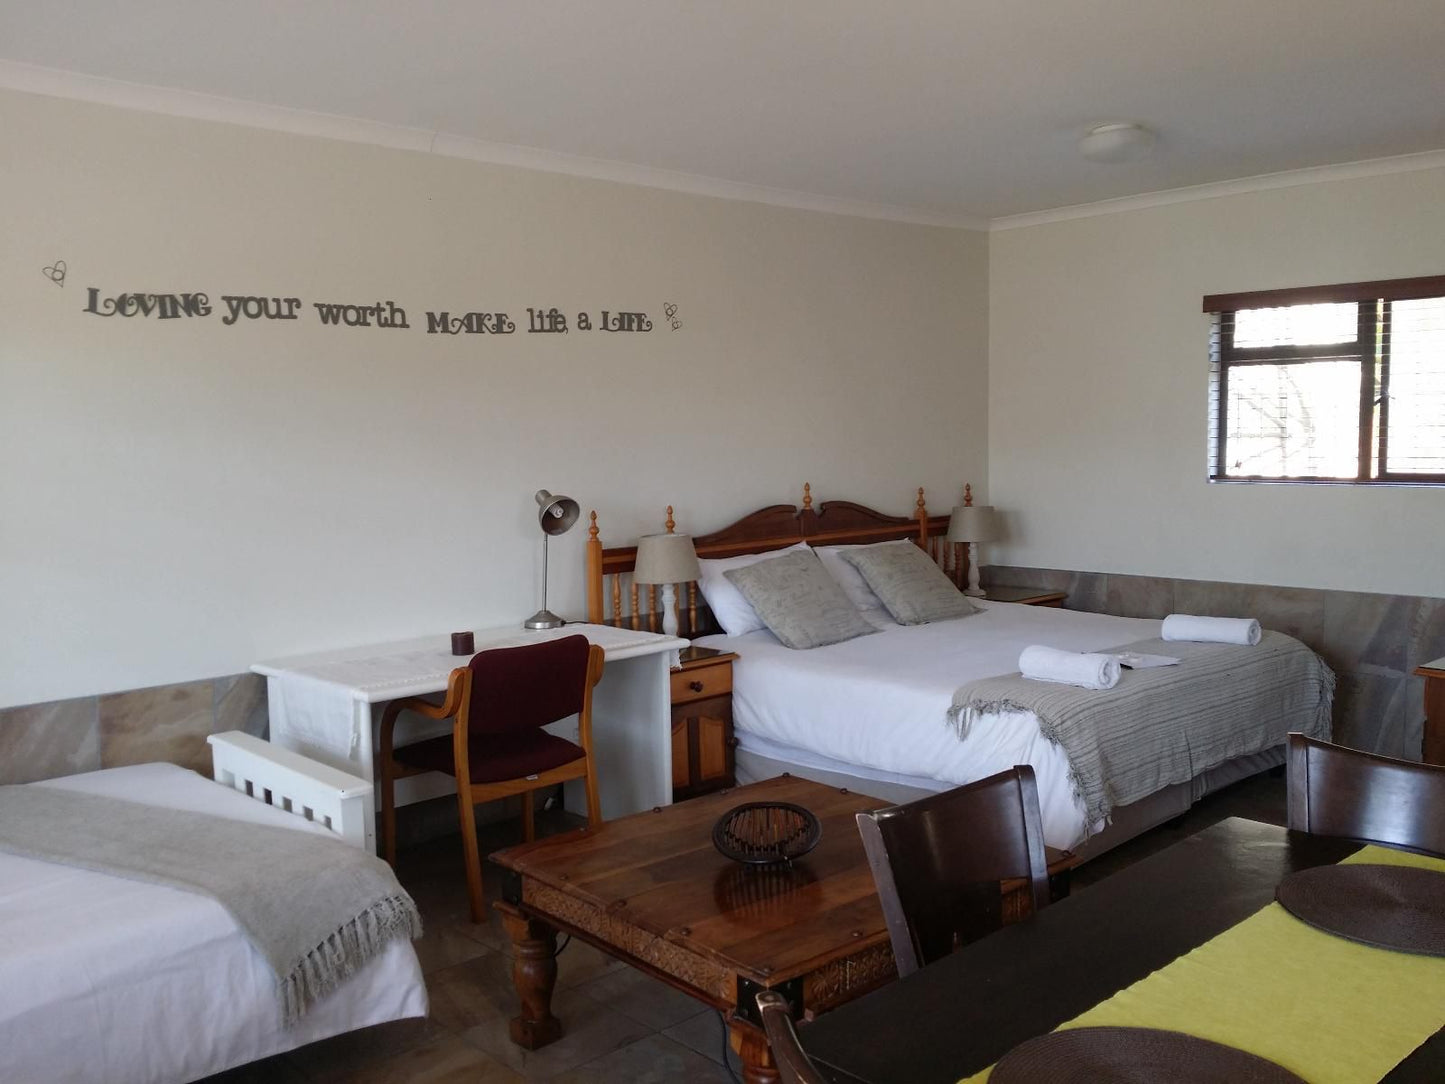 12 On Beach Guest House Saldanha Western Cape South Africa Window, Architecture, Bedroom